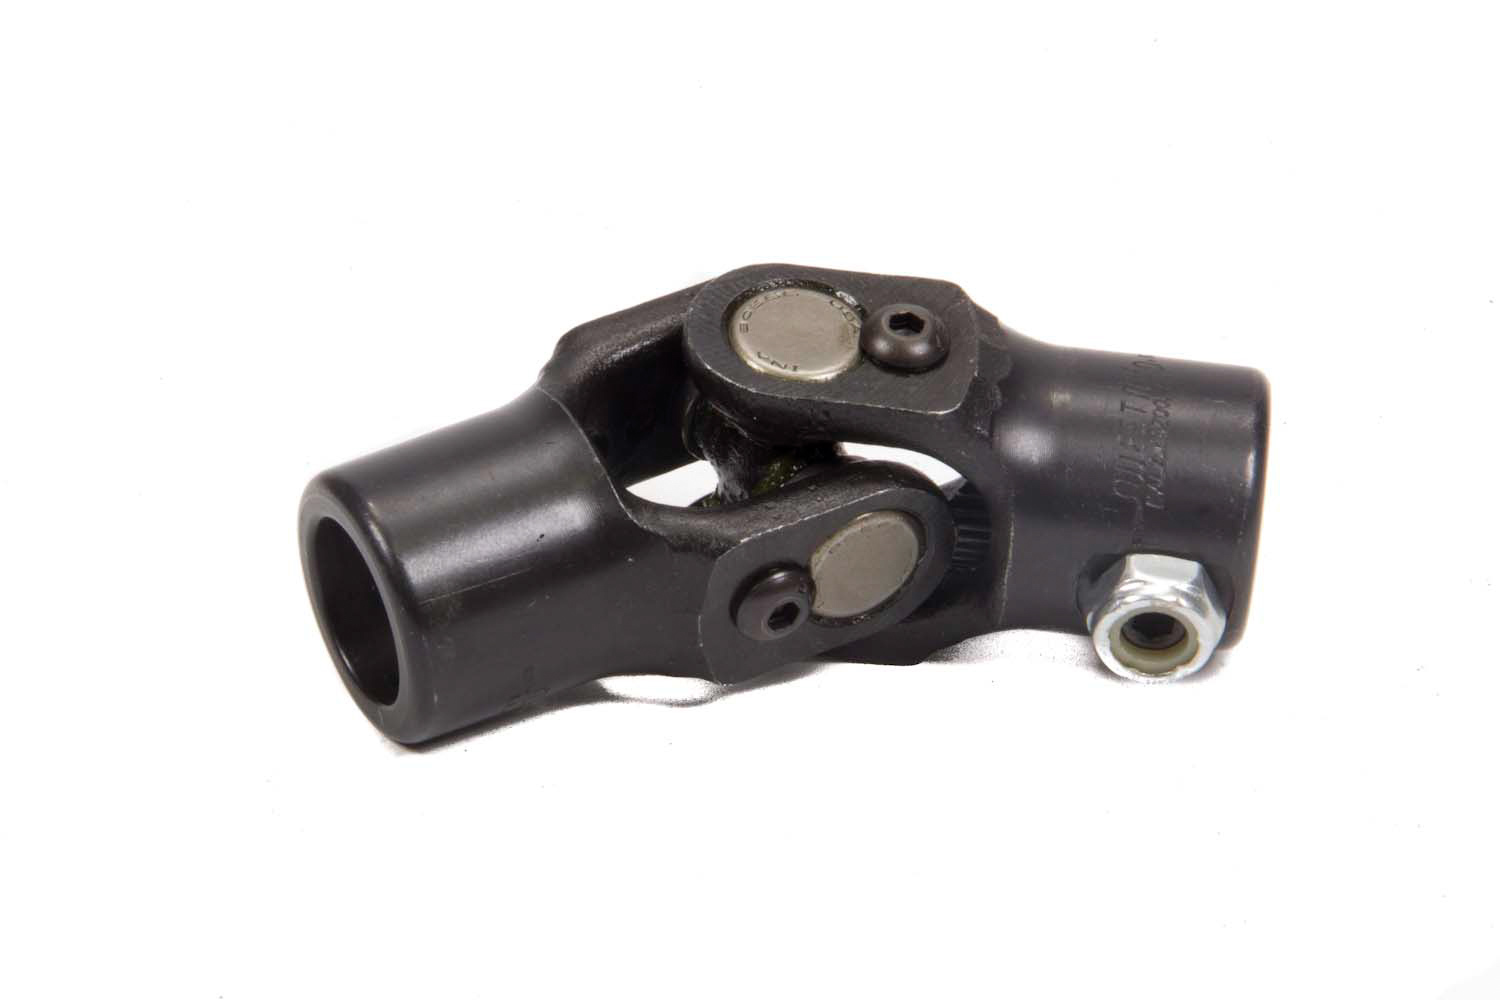 Sweet Manufacturing 401-50613 Steering Universal Joint, Single Joint, 3/4 in Smooth Bore to 9/16 in 26 Spline, Steel, Black Paint, Each